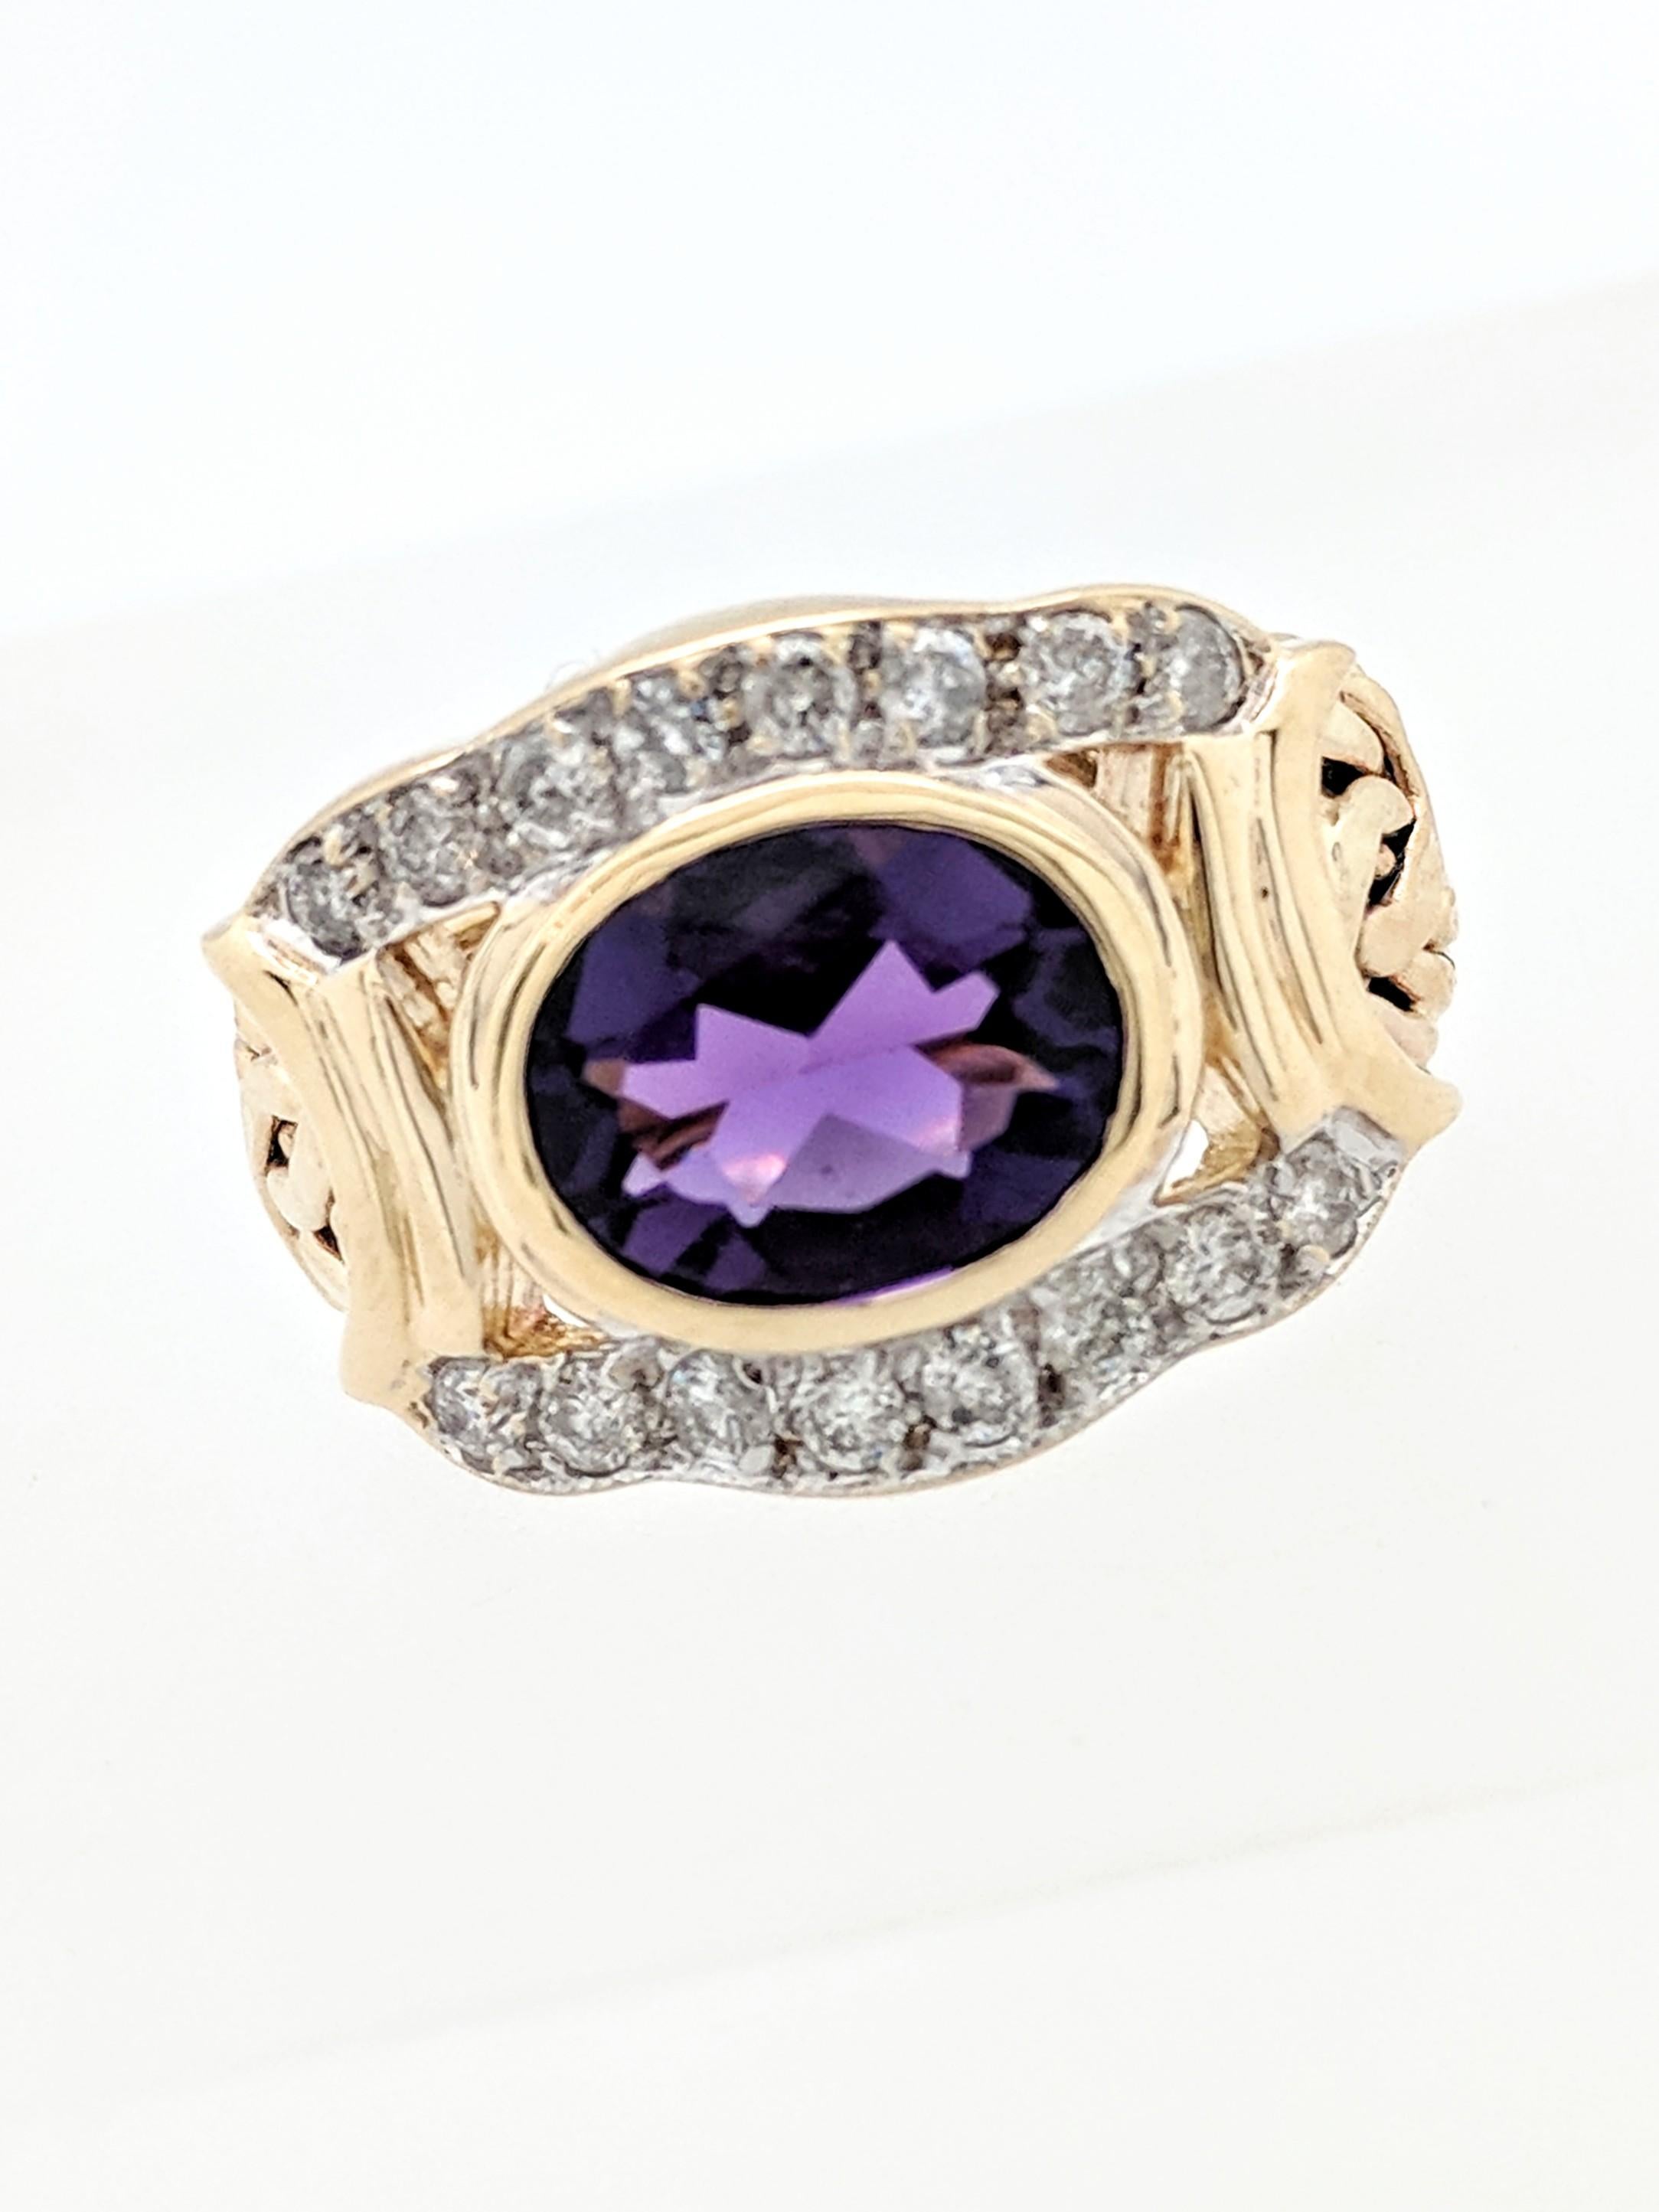 You are viewing a beautiful Amethyst & diamond ring.  
This ring is crafted from 14k yellow gold and weighs 6.5 grams.  It features (16)  .01ct natural round diamonds and (1) bezel set oval shaped Amethyst.

Currently this beauty is a size 6 and can